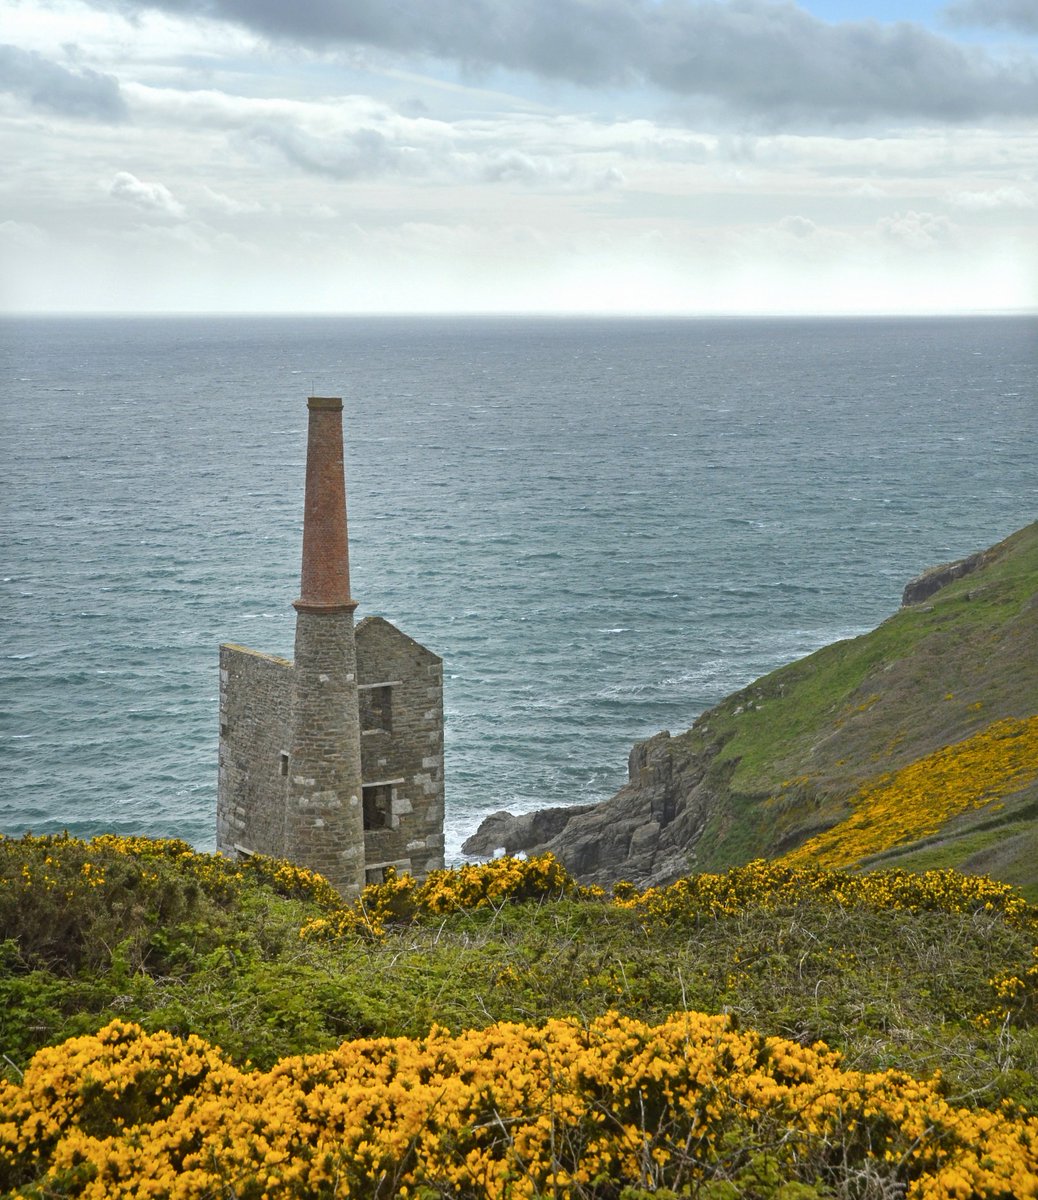 Just over 2 weeks til #WorldHeritageDay.
250,000 - 500,000 people migrated from #Cornwall and #WestDevon in the century after 1815, transferring mining practices and traditions which gave the #CornishMining industrial region a global significance.
tinyurl.com/3w8f4tat